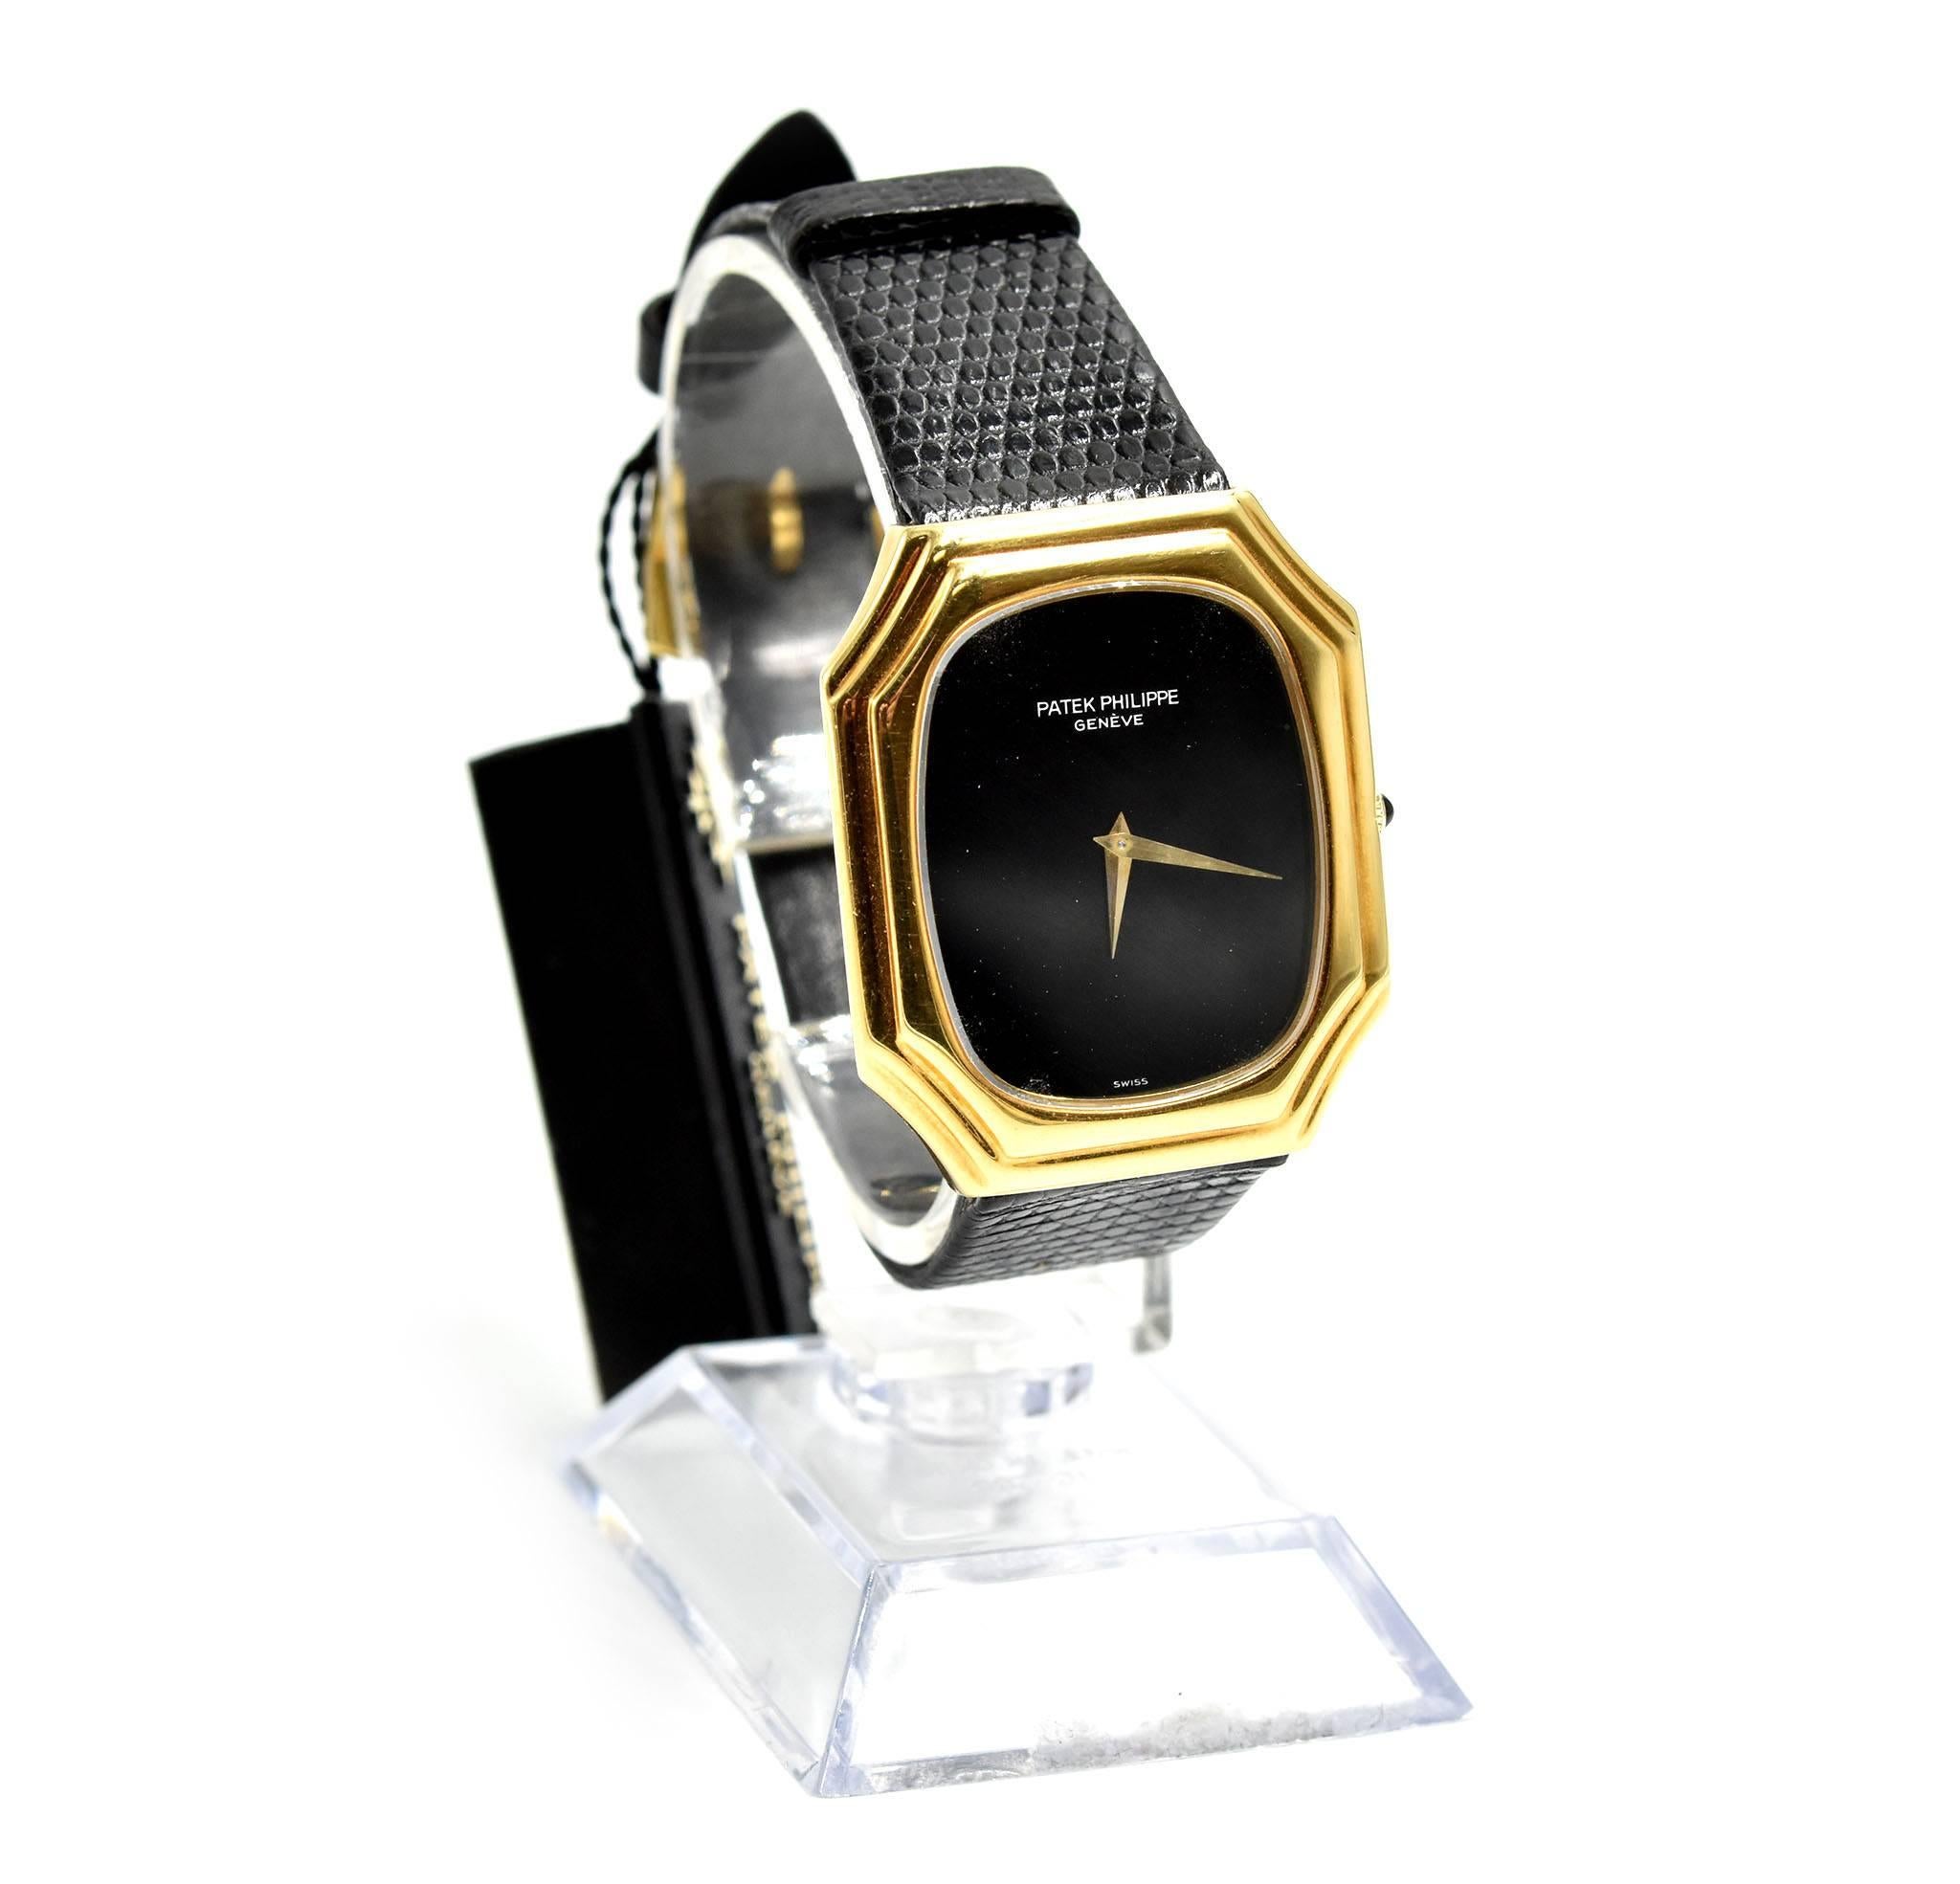 Movement: manual wind
Function: hours, minutes
Case: 18k yellow gold 31mm x 37mm rectangular case, sapphire protective crystal, pull/push crown
Band: black lizard band with gold buckle
Dial: onyx dial with gold hands
Serial #: 2764XXX
Reference #: